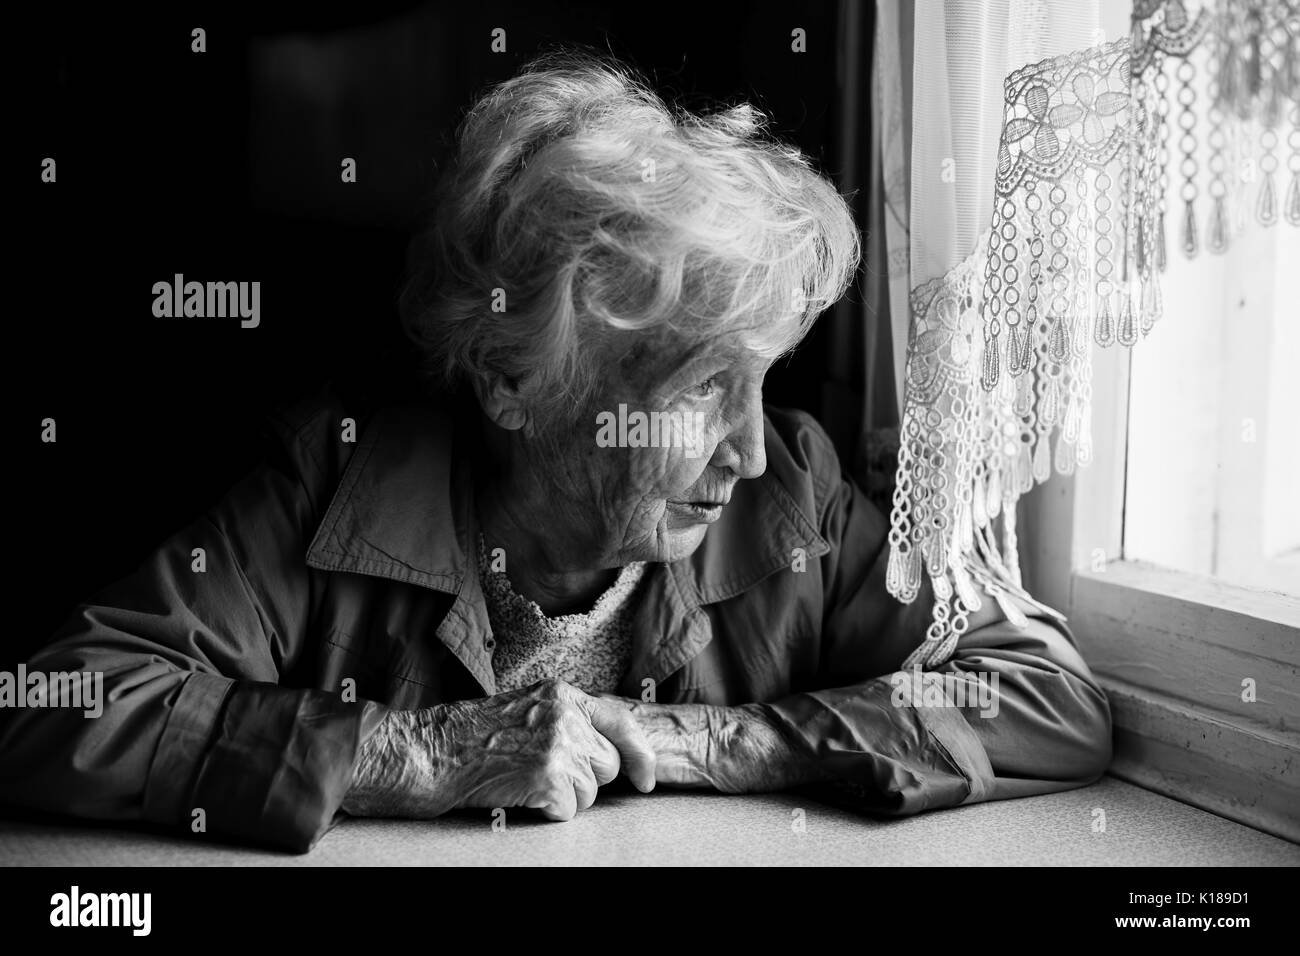 An elderly woman looks longingly out the window. Stock Photo